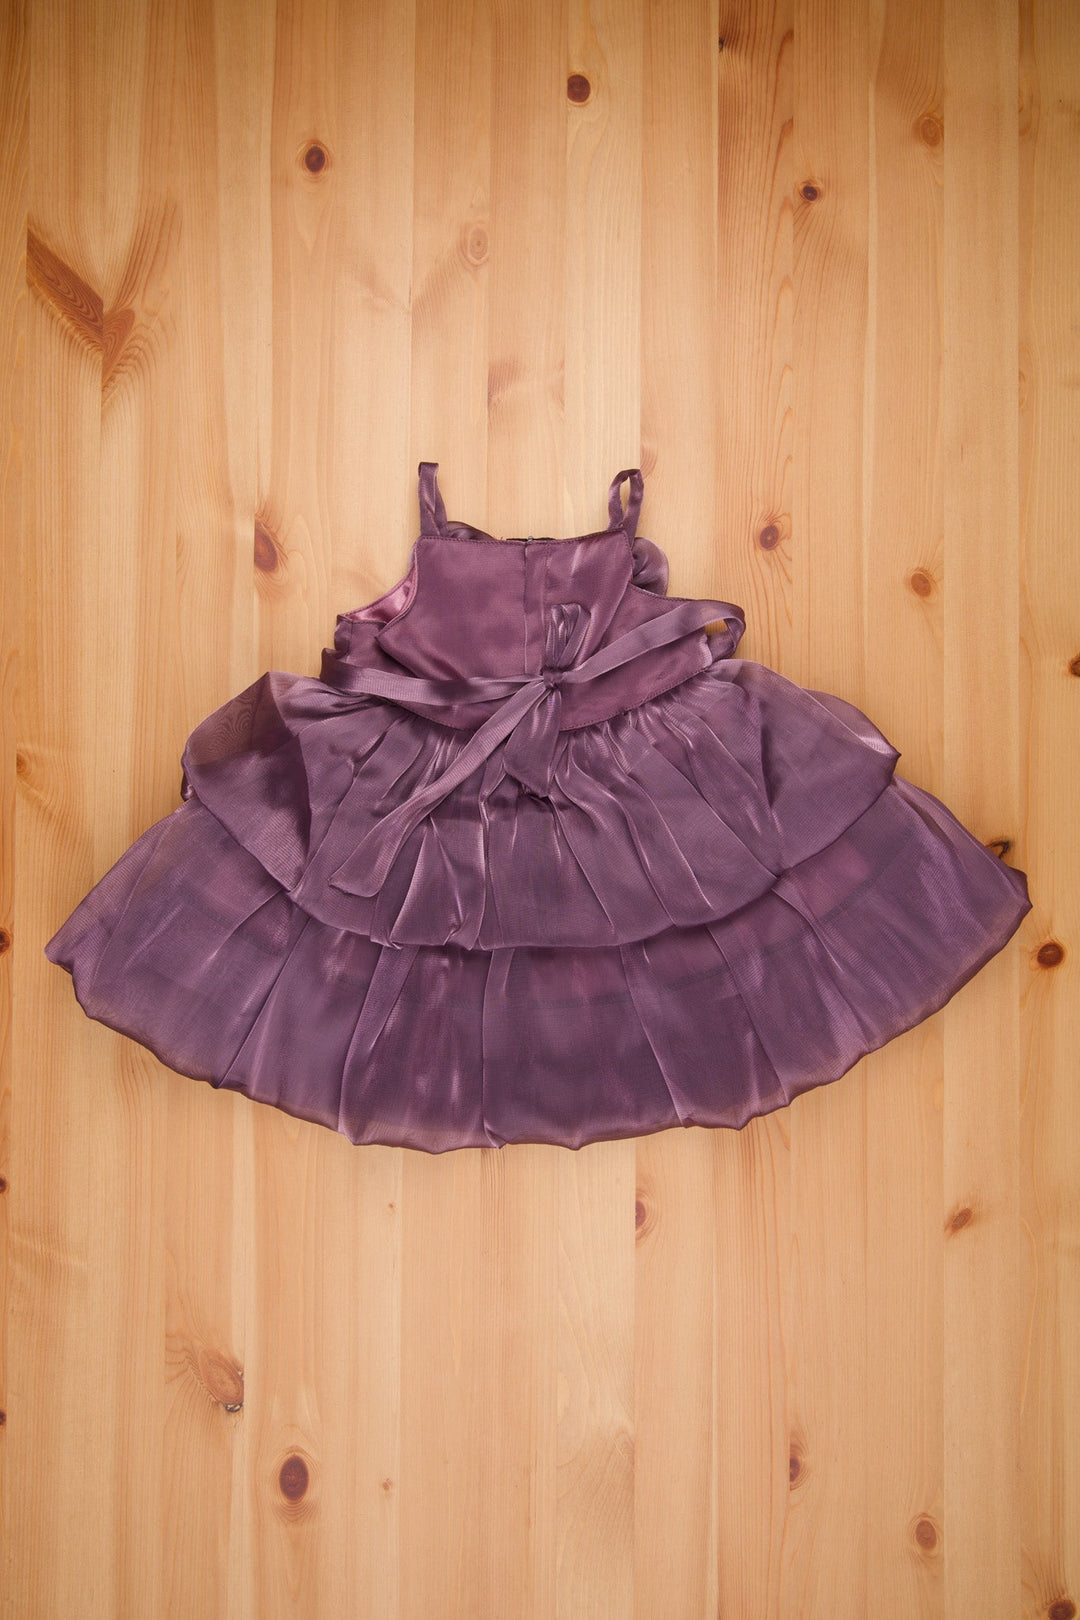 The Nesavu Girls Fancy Party Frock Purple Passion Newborns Two-Layered Shimmer Dress - Strap Shoulders & Rose Details - Mesmerizing Party Frock Nesavu First Birthday Frock Girl | Frock For Girl For Birthday | The Nesavu